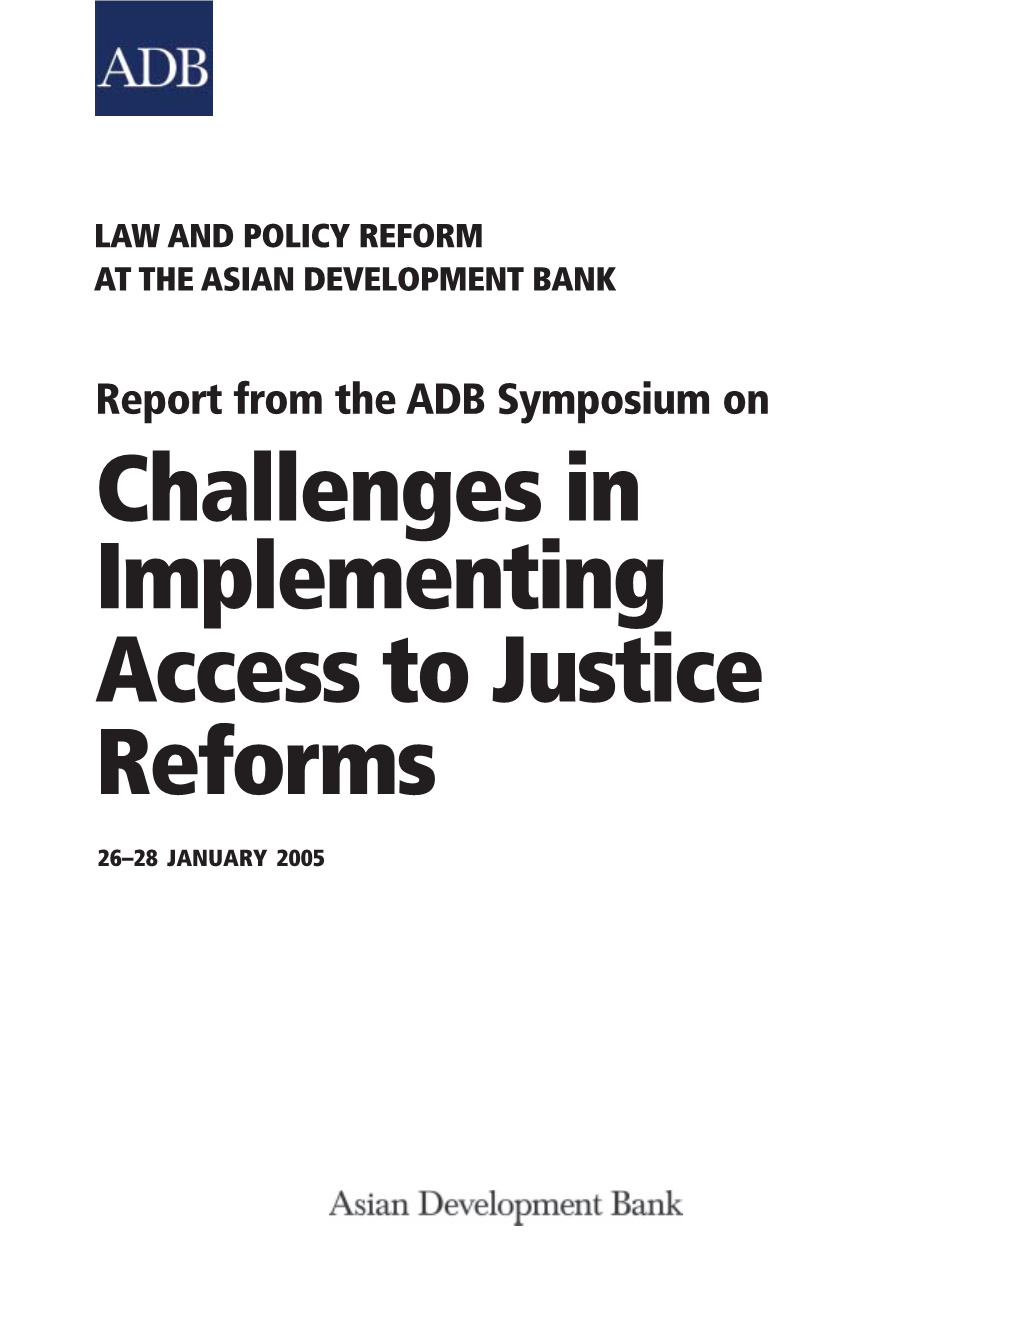 Challenges in Implementing Access to Justice Reforms